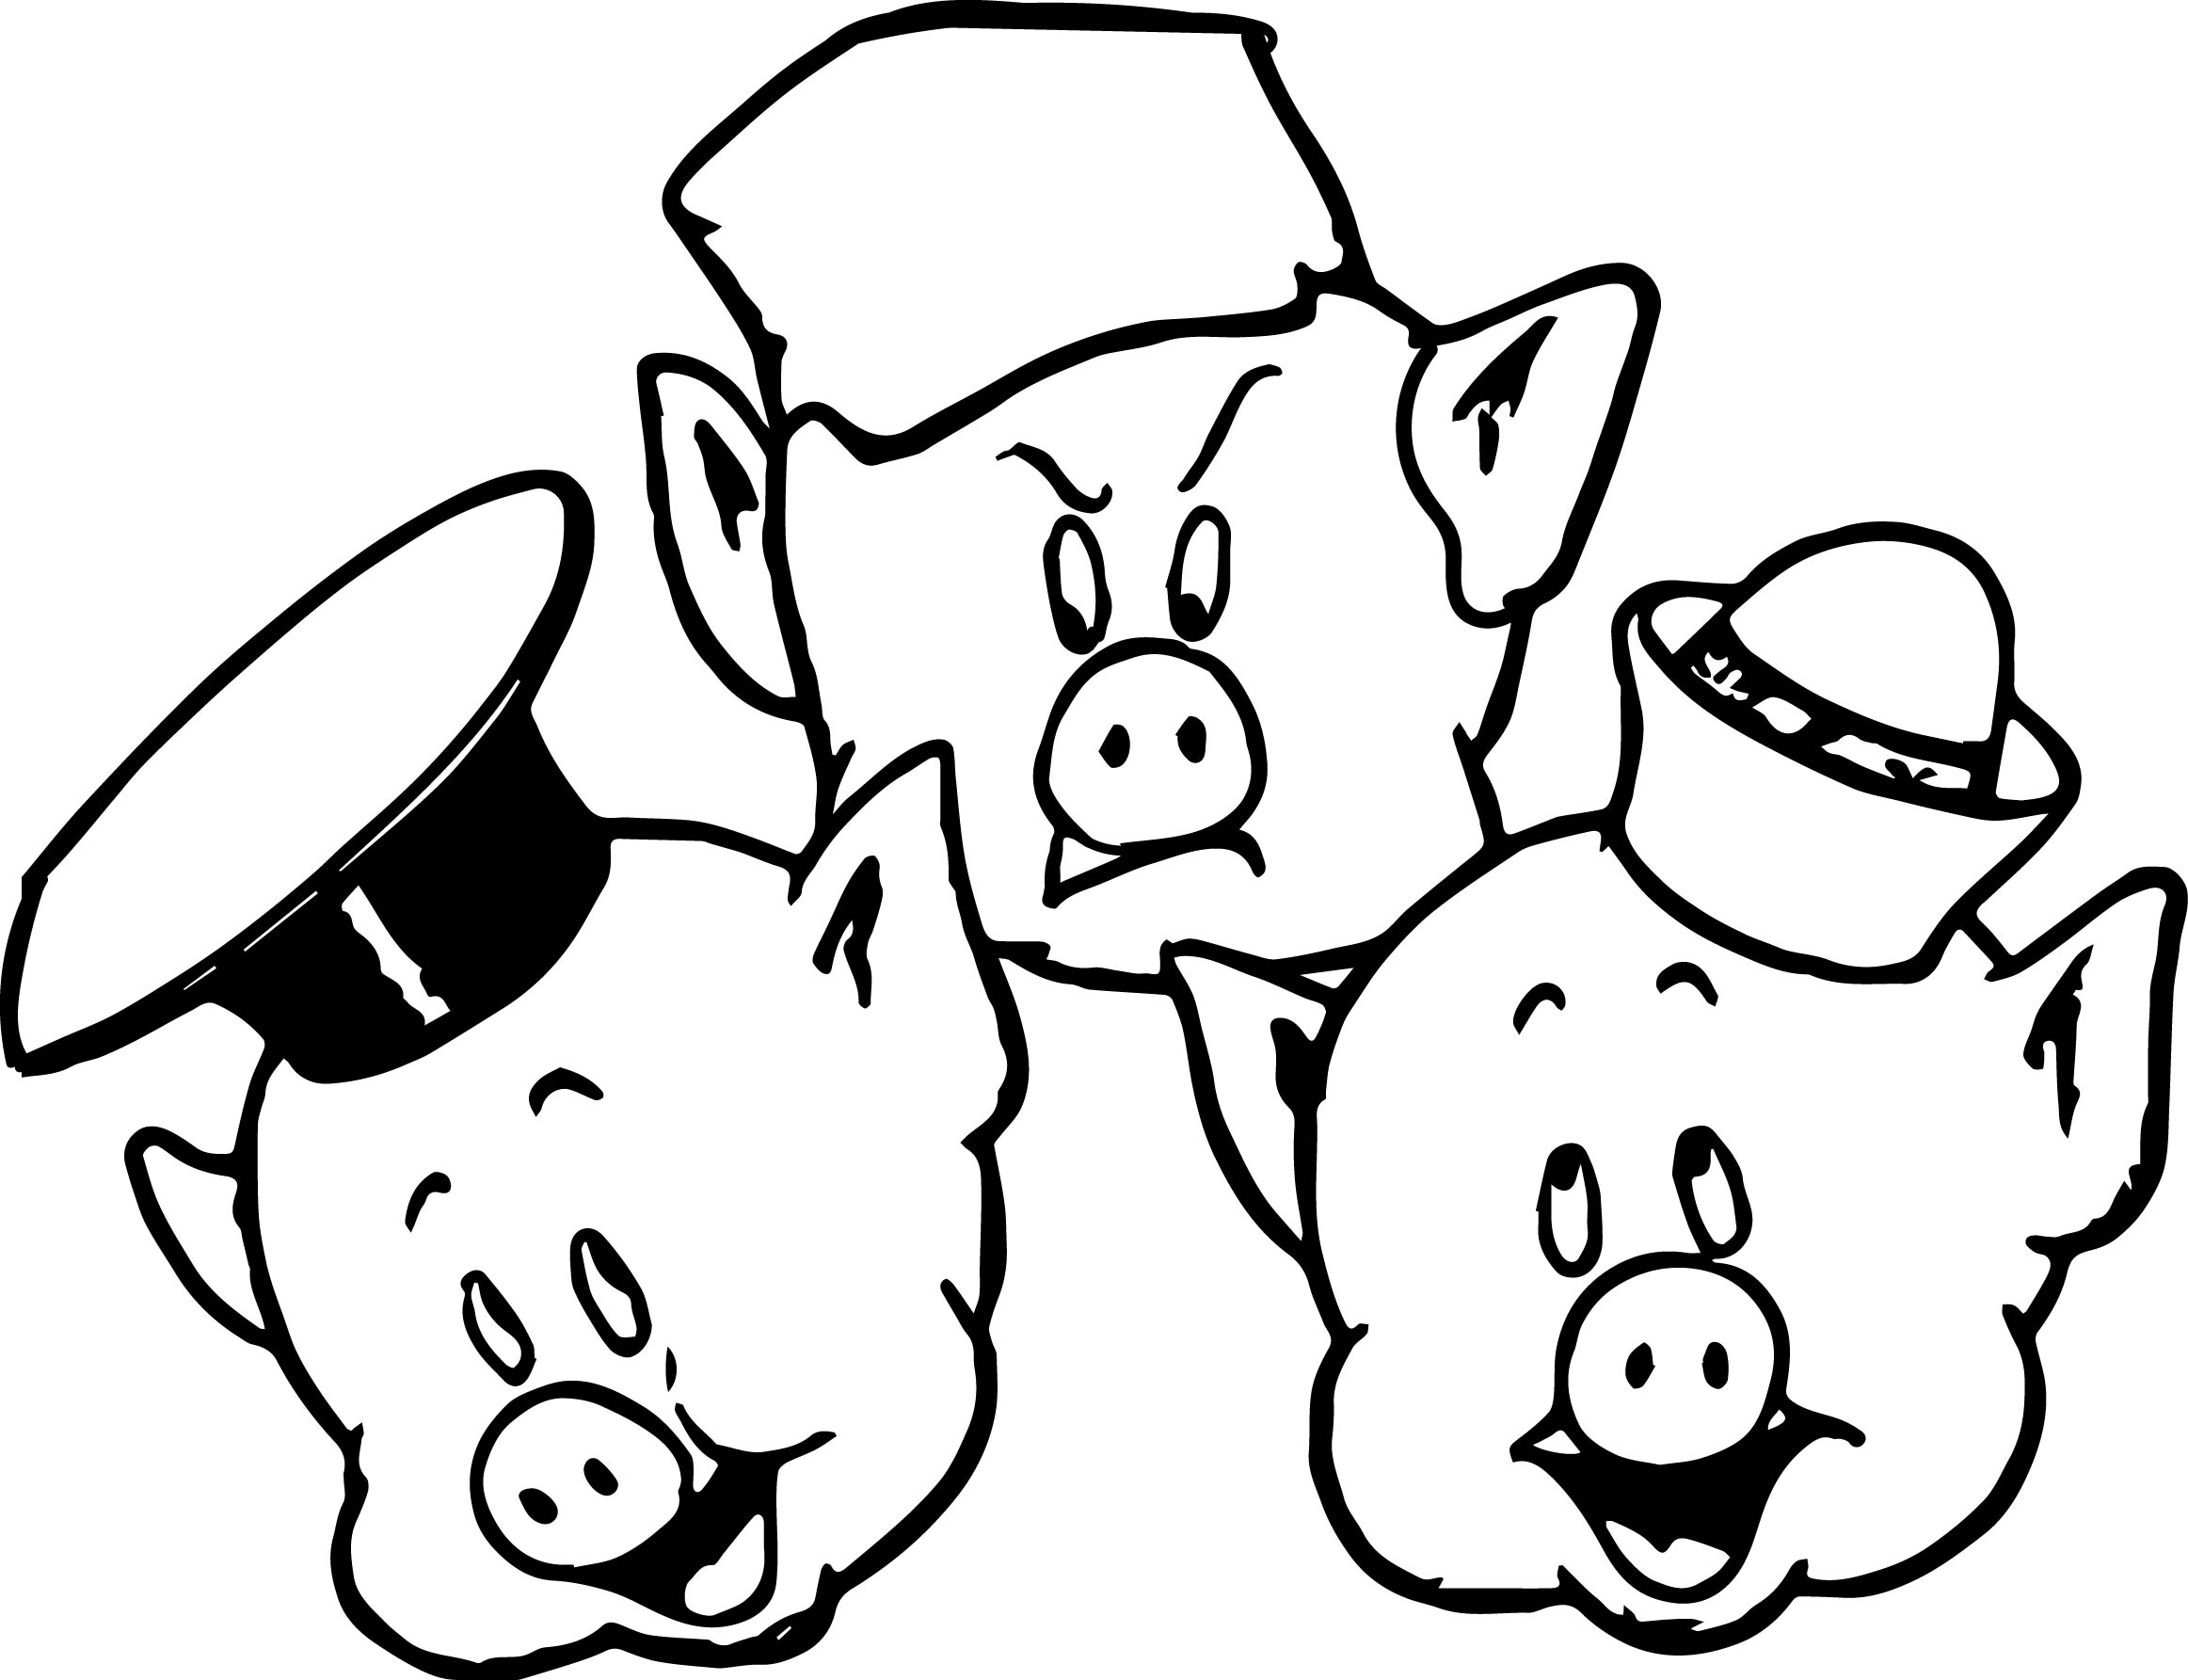 Pig face 3 little pigs face coloring page wecoloringpage clipart